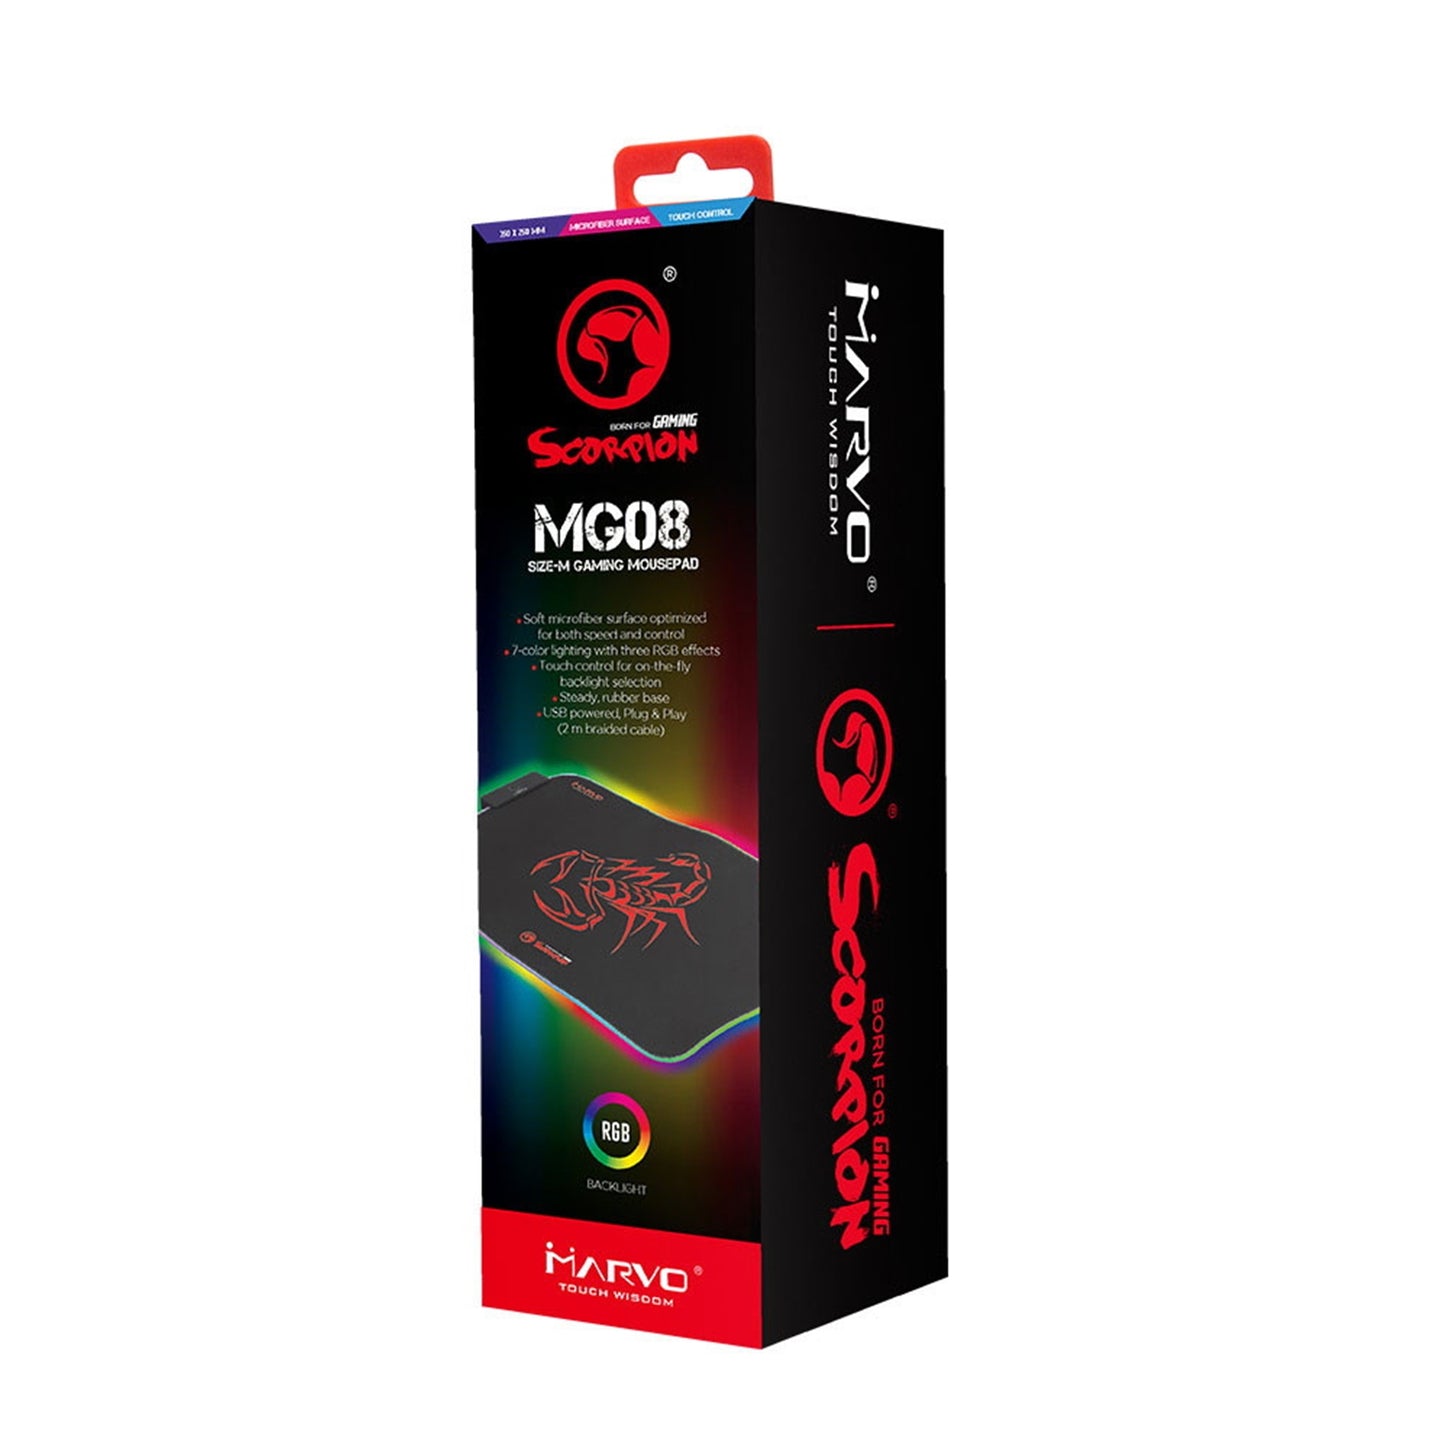 Marvo MG08 Gaming Mouse Pad, 7 Colour LED with 3 RGB Effects, Medium 350x250x4mm, USB Connection